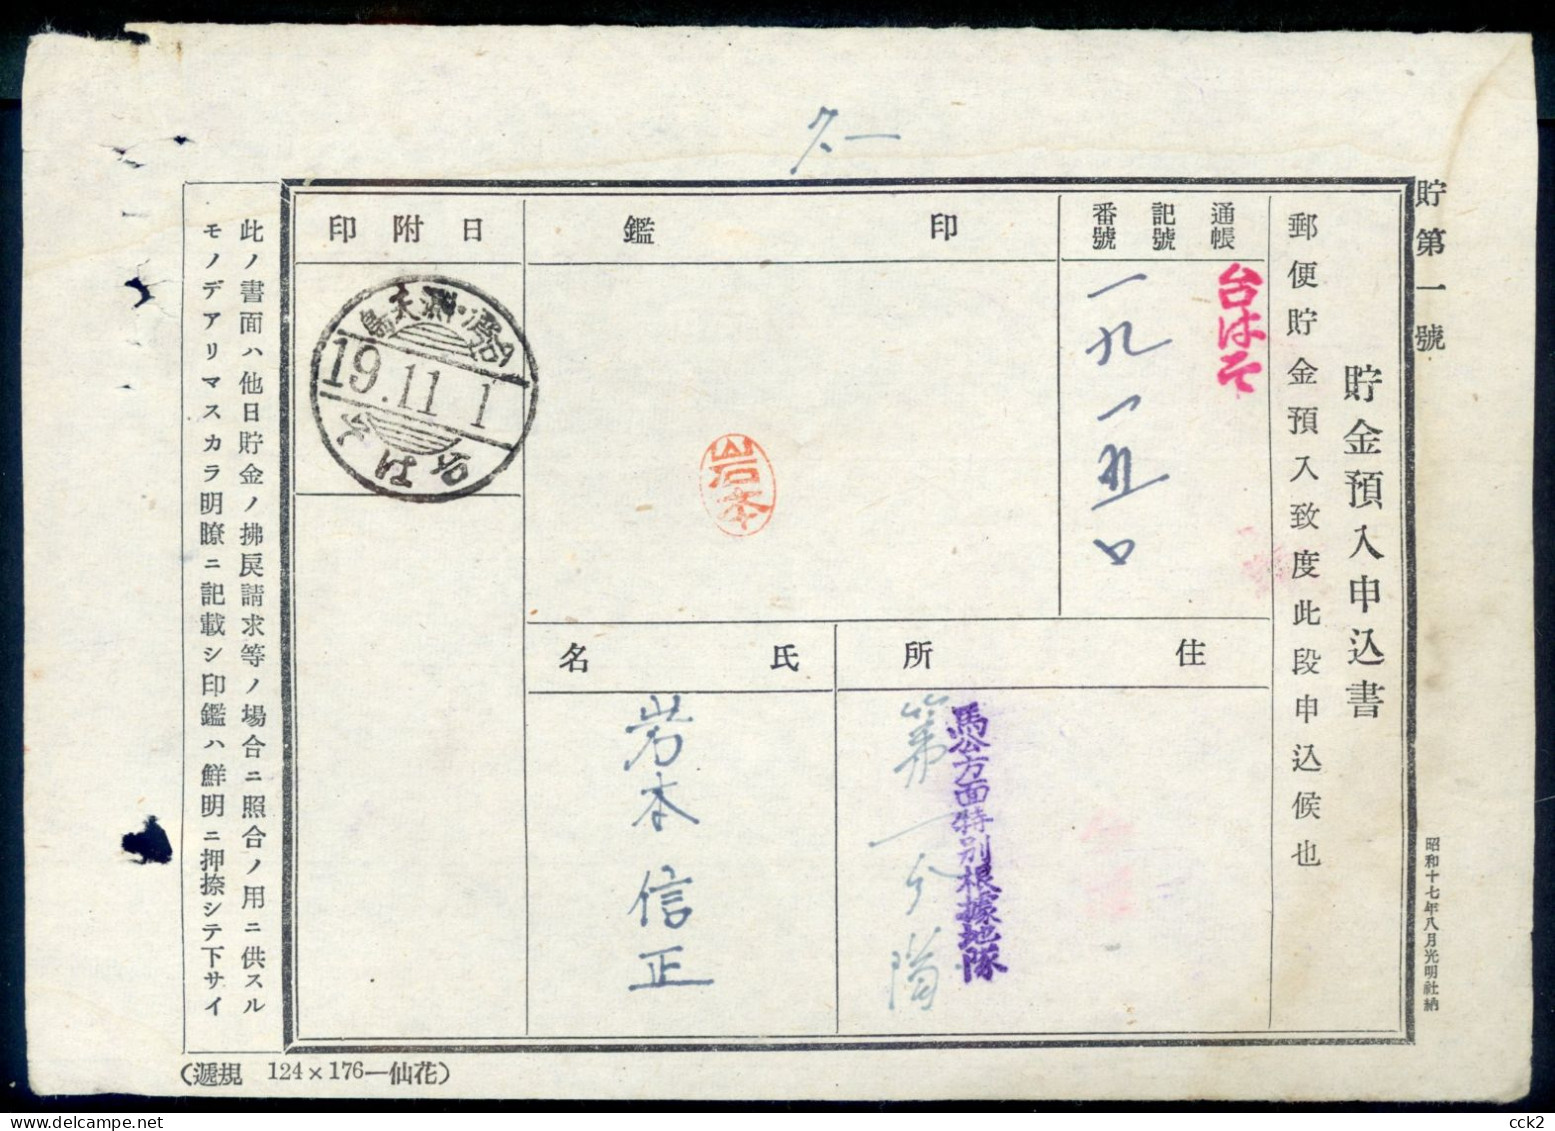 JAPAN OCCUPATION TAIWAN- Reserve Fund Early Entry Application Form(Taiwan Cetian Island) 19.11.1 - 1945 Japanisch Besetzung